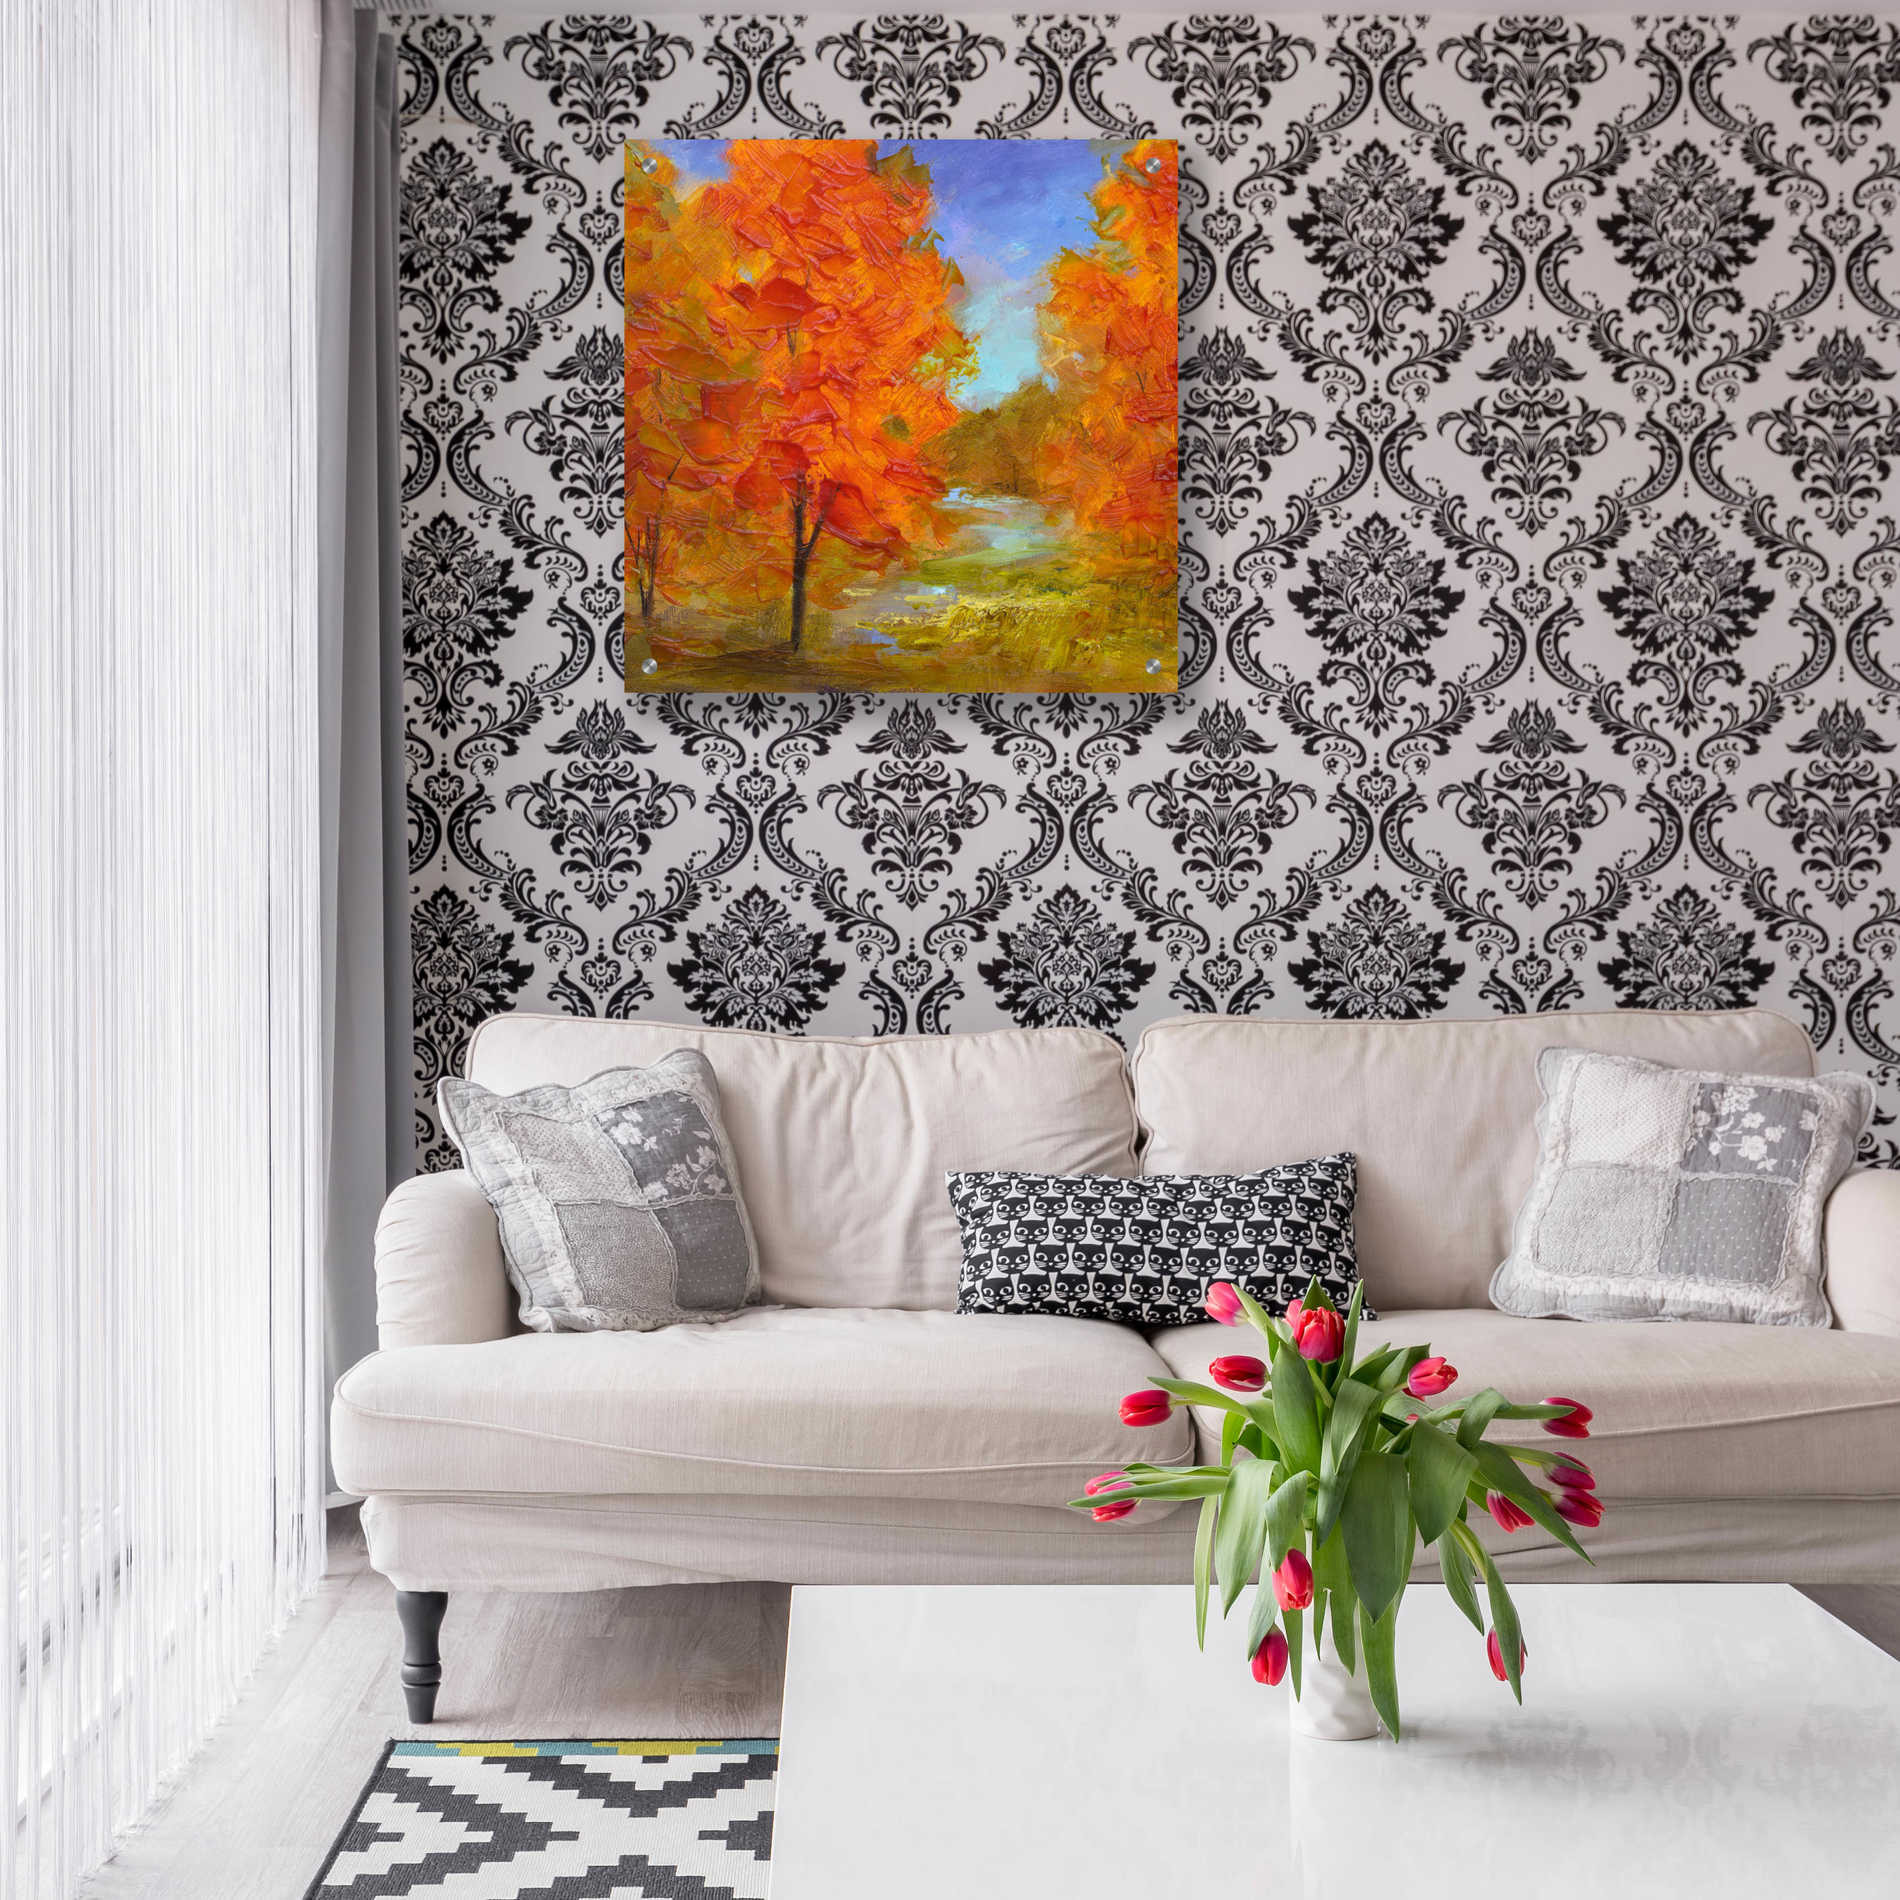 Epic Art 'Burst of Autumn Color' by Sheila Finch, Acrylic Glass Wall Art,24x24